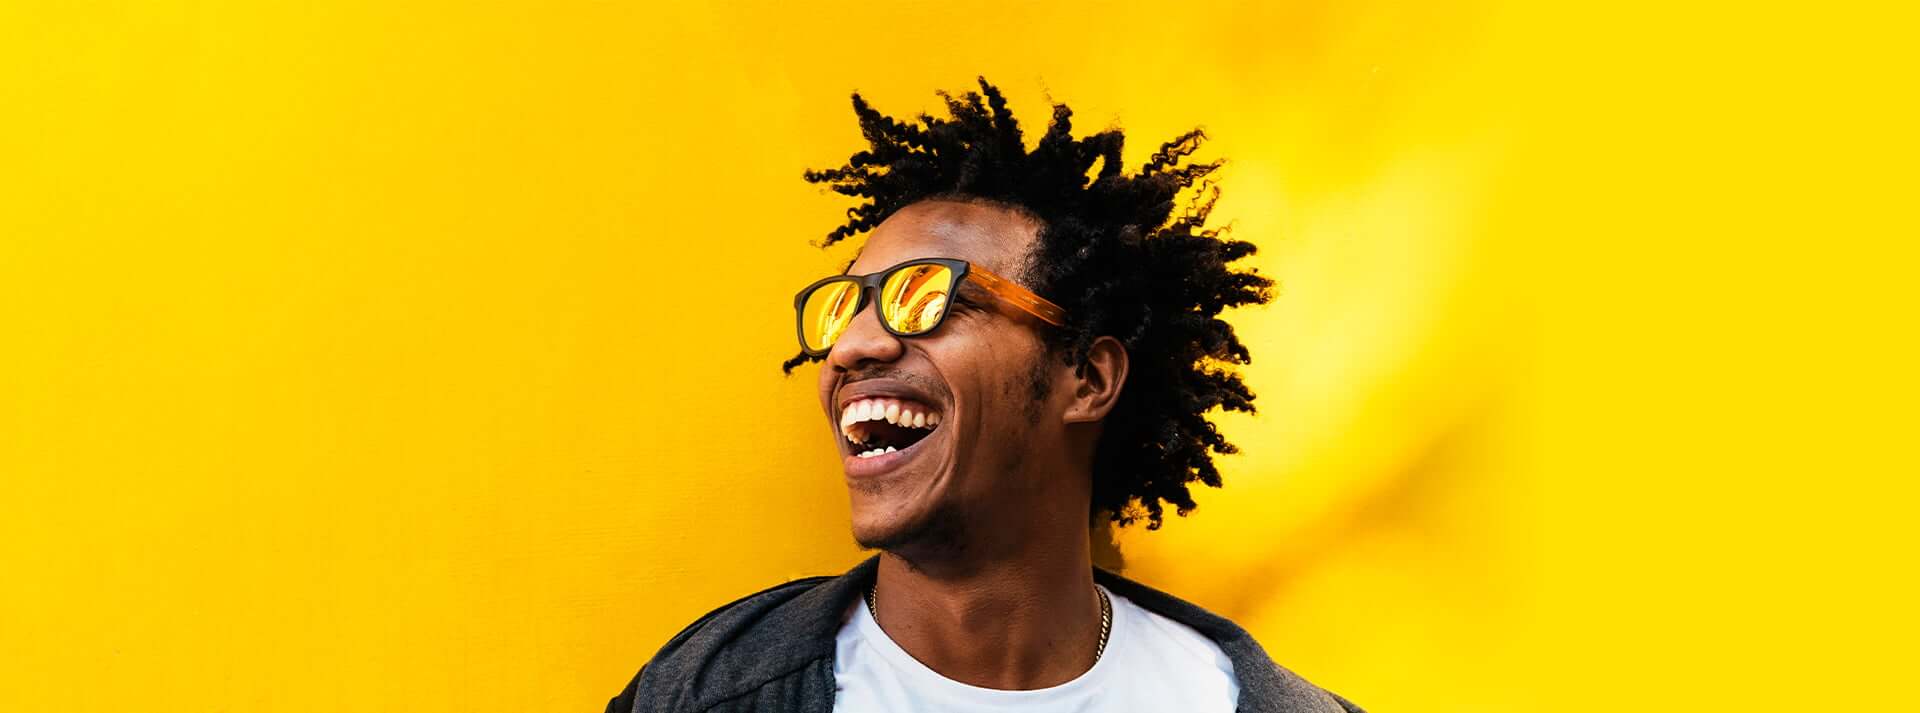 Man with sunglasses laughing